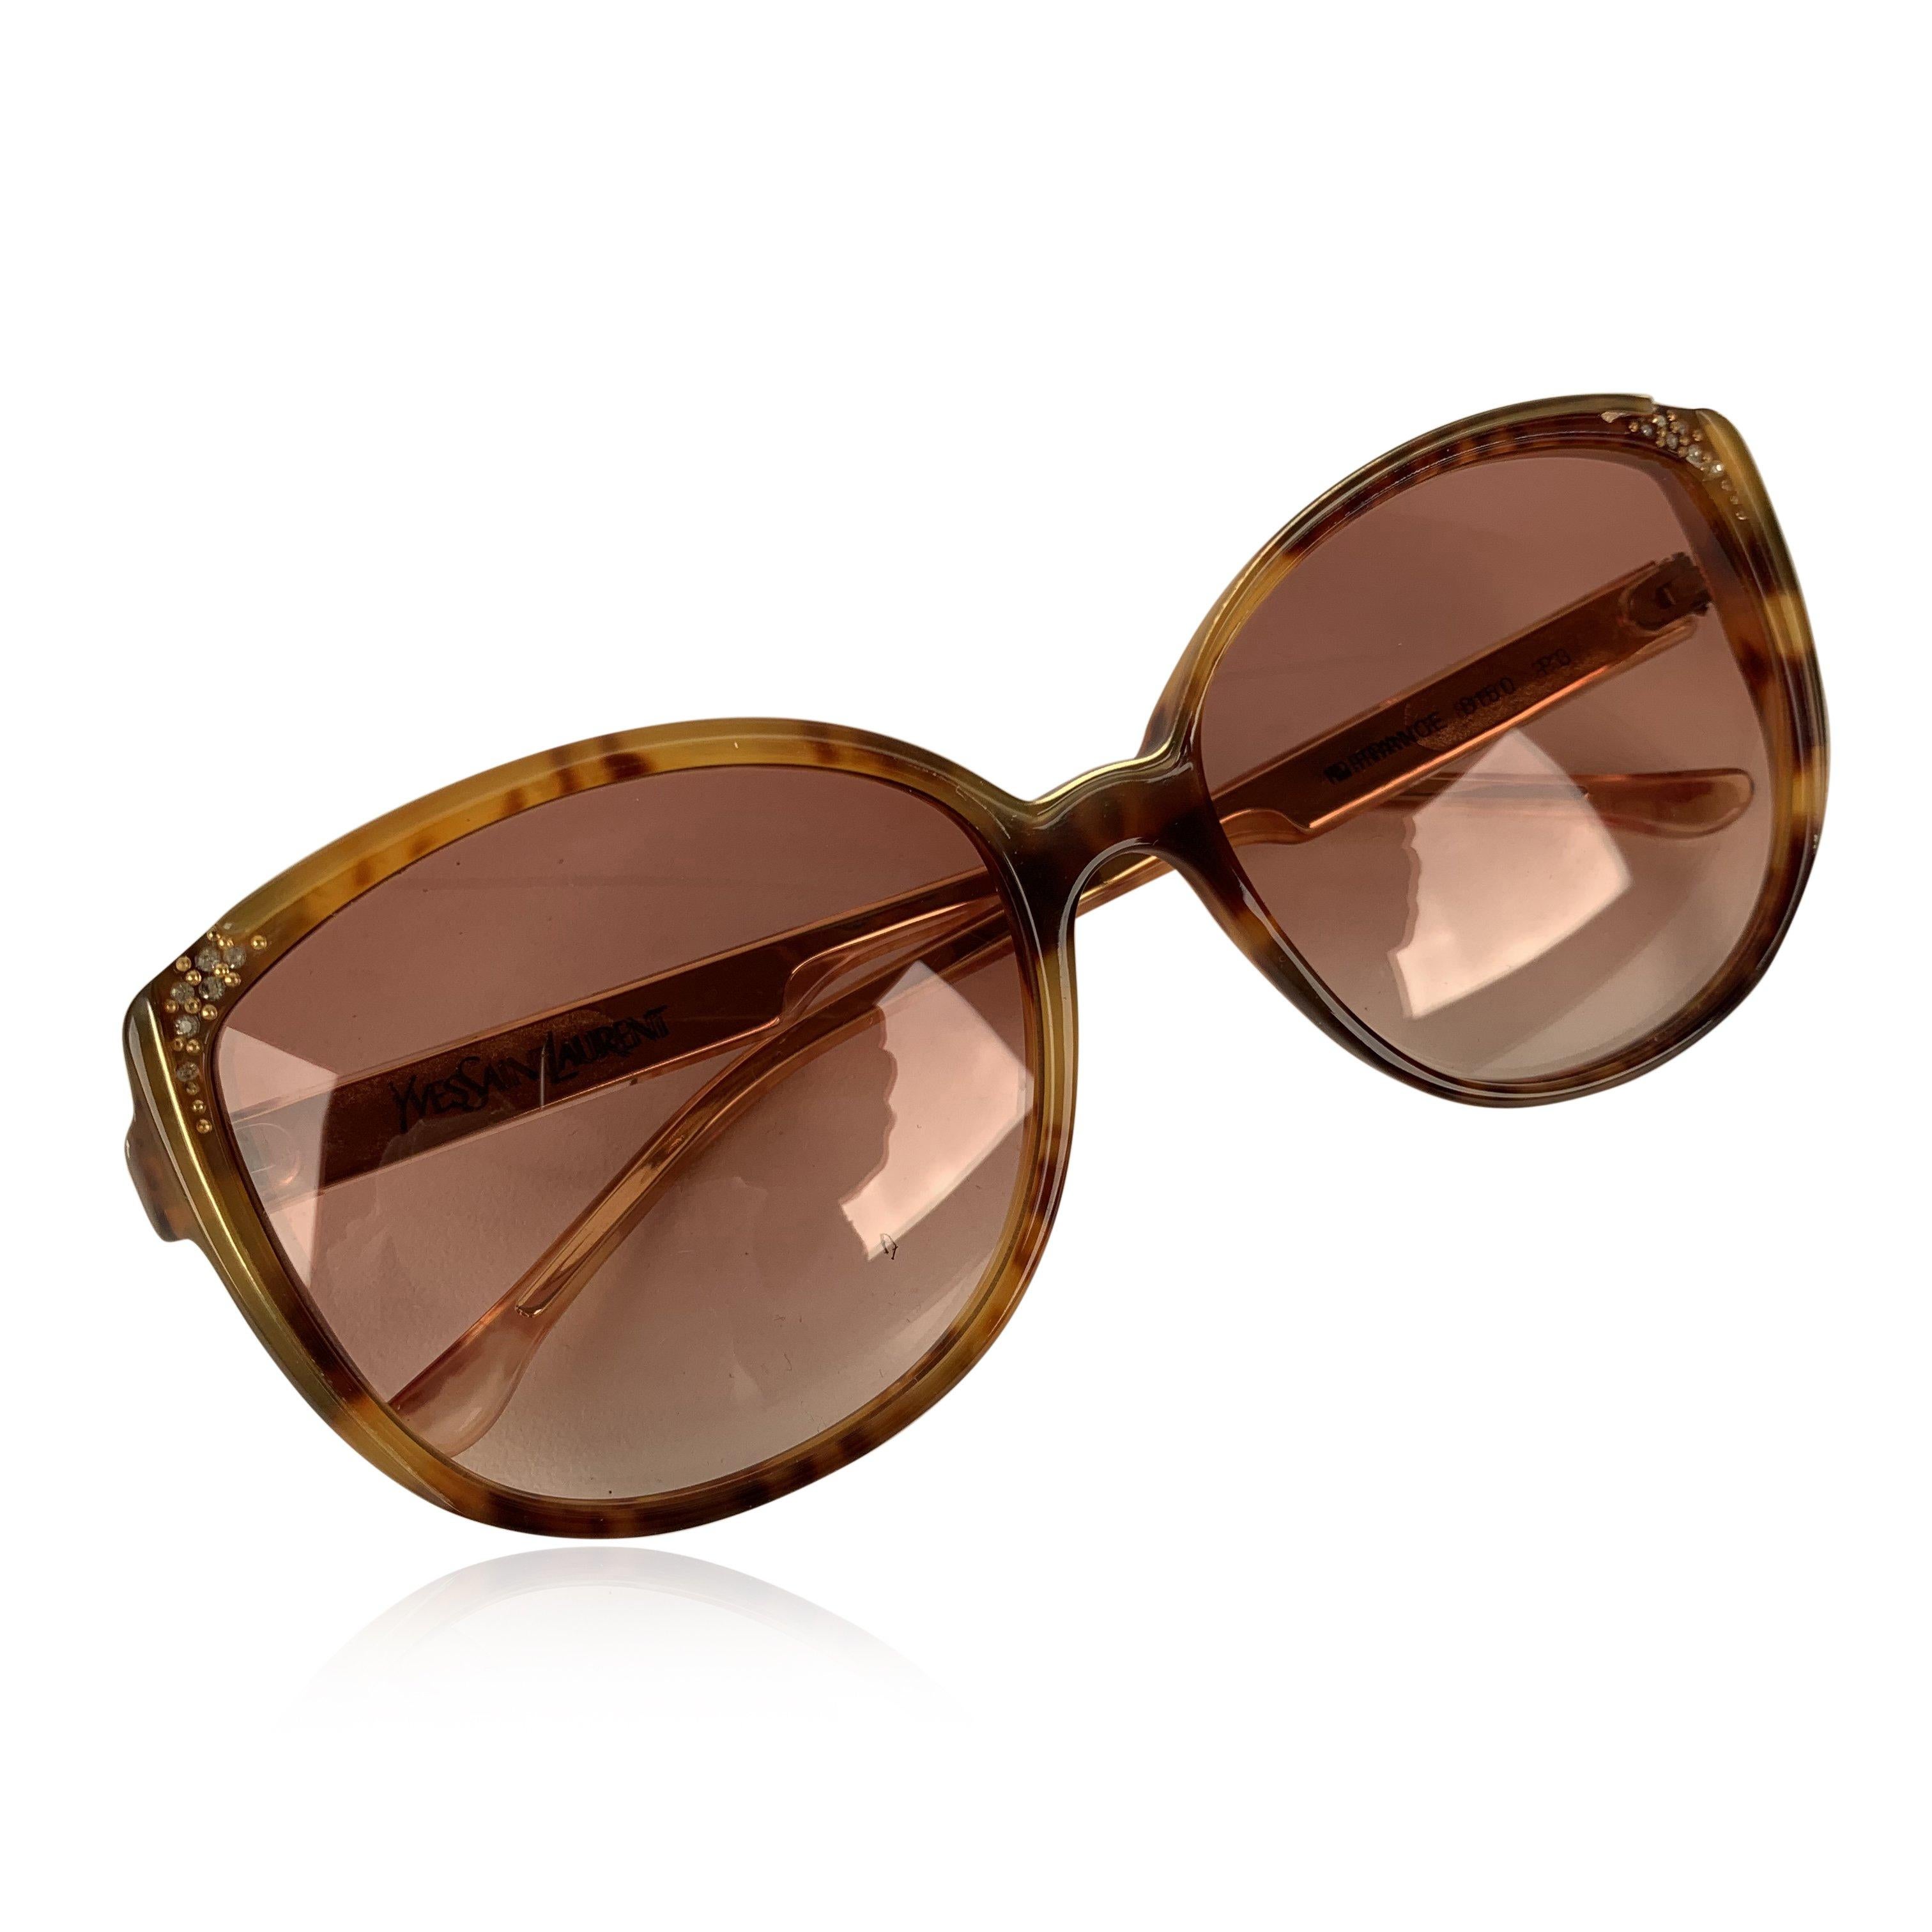 Vintage YVES SAINT LAURENT oversized sunglasses, mod. 8150. Tortoise acetate frame with crystals and small gold-tone studs embellishment. YSL signatures on the side of the arms. model: 8150 P 3. 100% UV excellent quality gradient brown lens. Made in